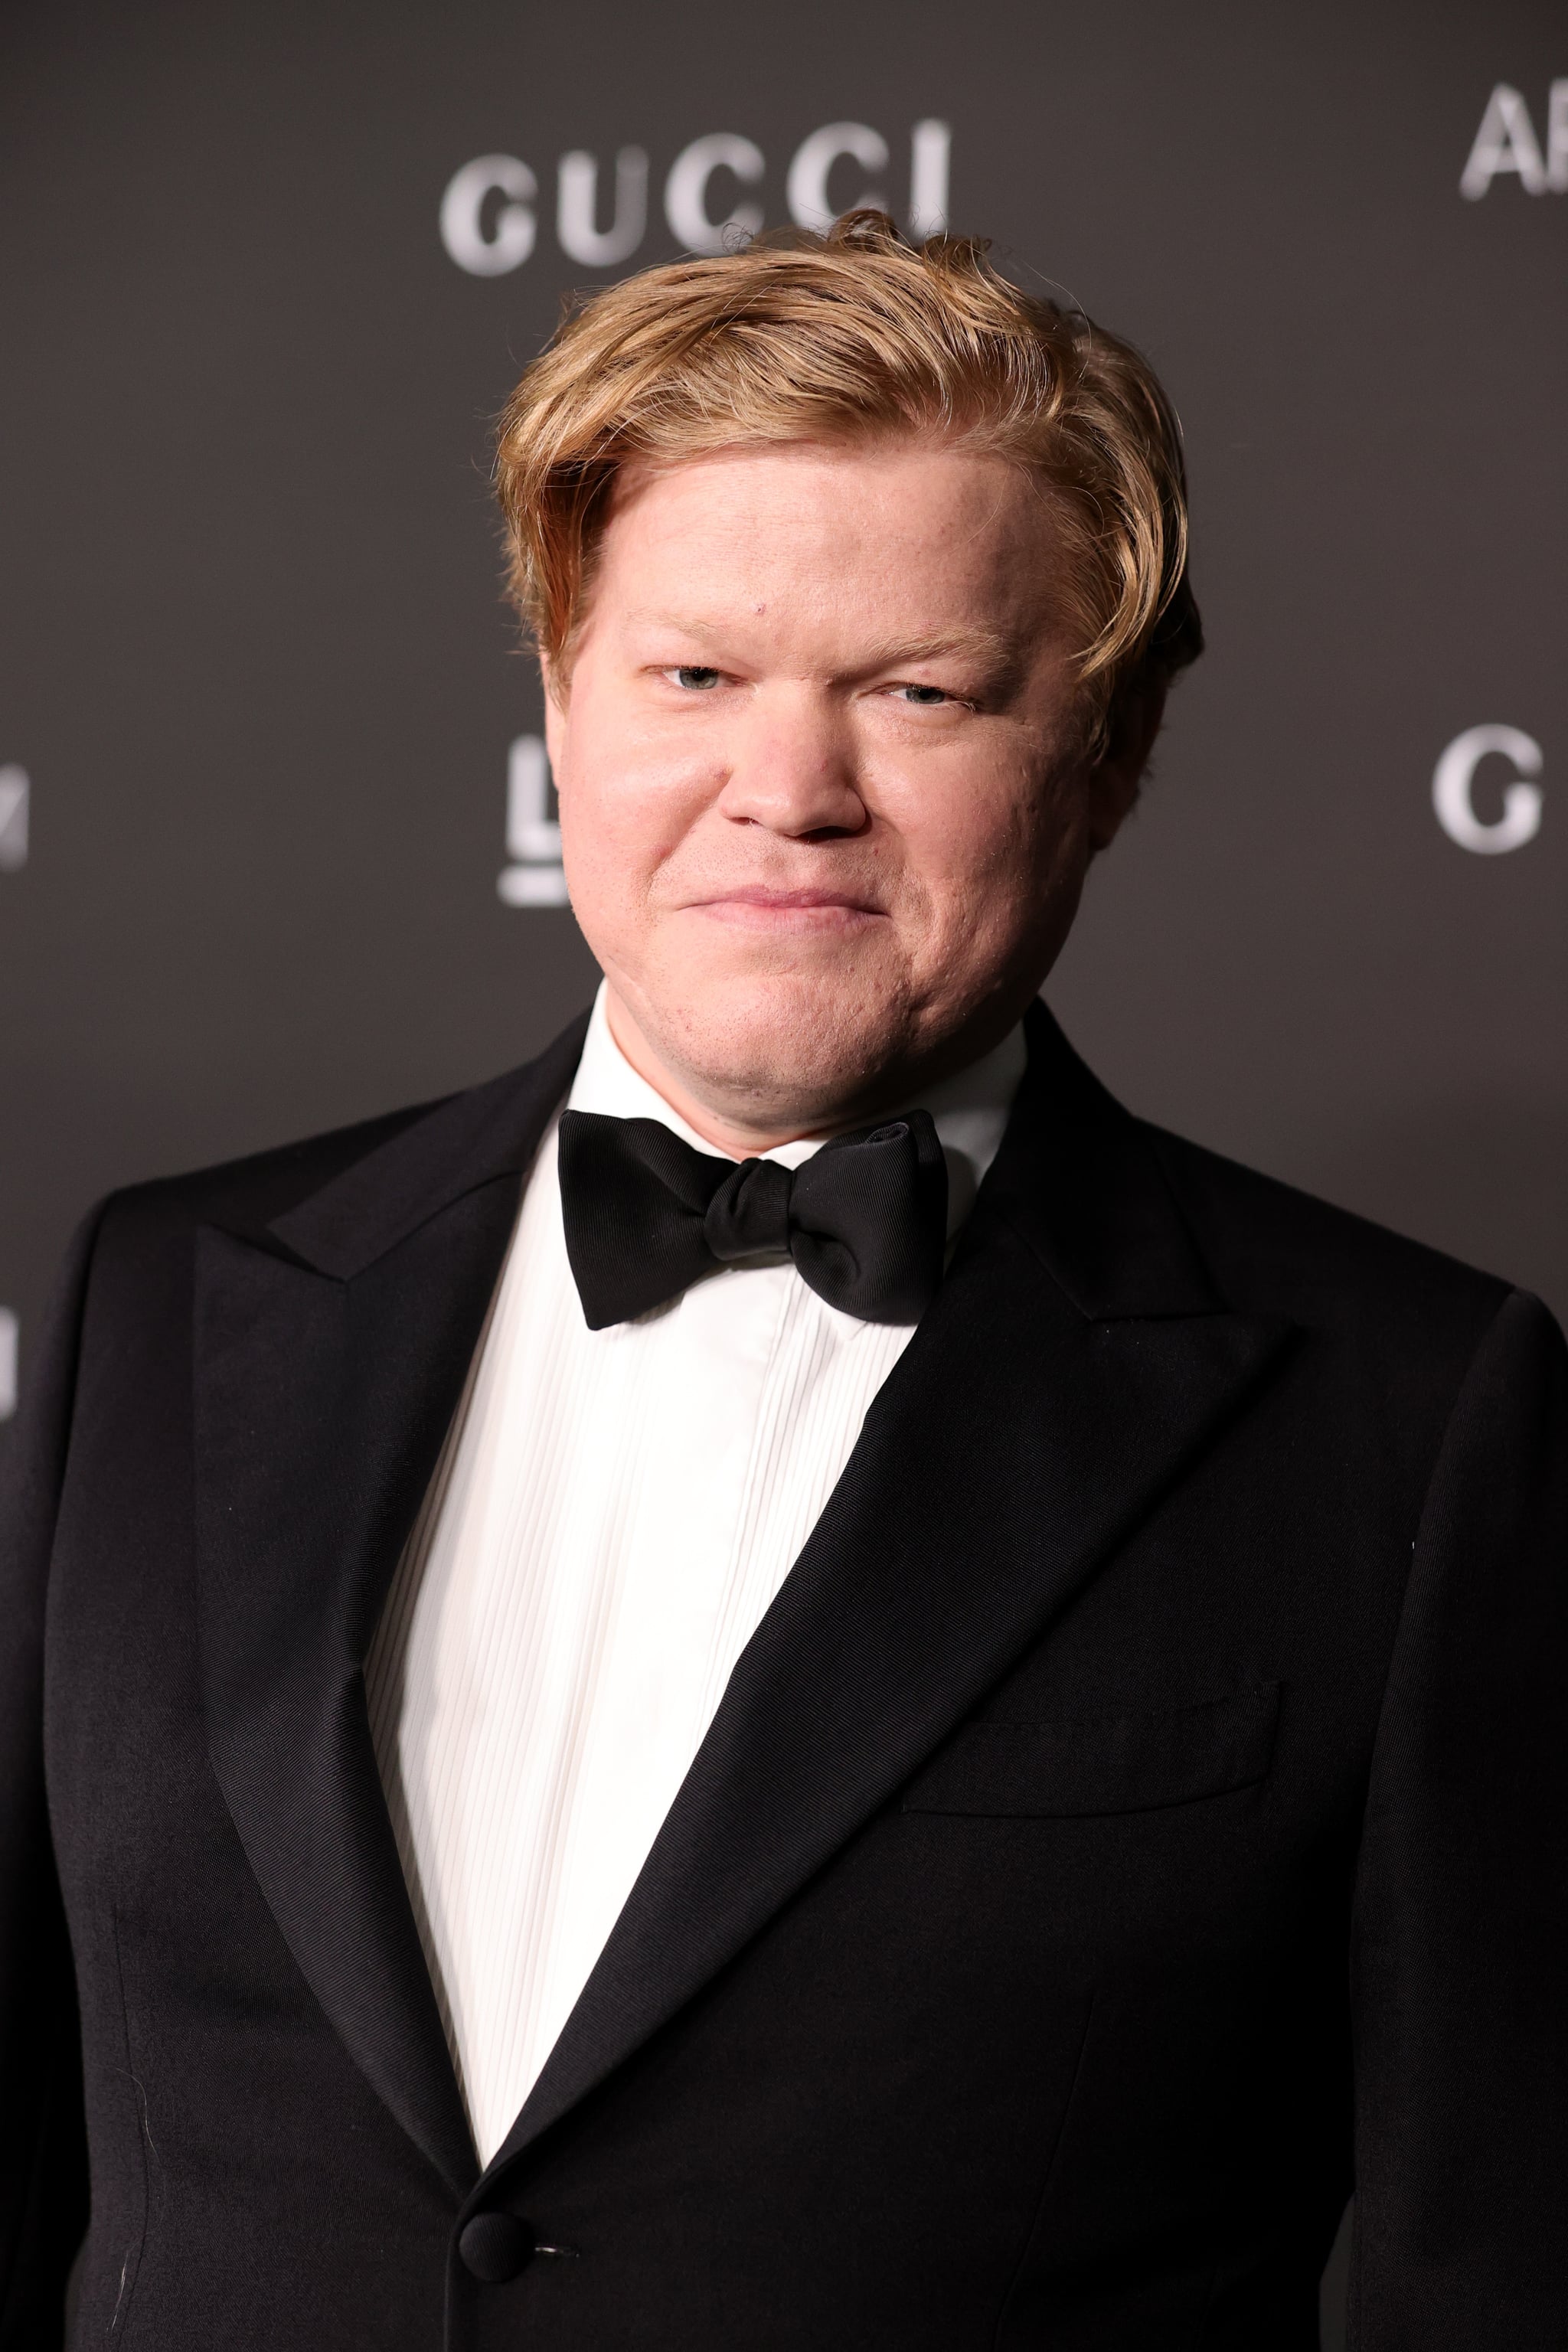 LOS ANGELES, CALIFORNIA - NOVEMBER 06: Jesse Plemons attends the 10th Annual LACMA ART+FILM GALA honouring Amy Sherald, Kehinde Wiley, and Steven Spielberg presented by Gucci at Los Angeles County Museum of Art on November 06, 2021 in Los Angeles, California. (Photo by Rich Fury/Getty Images for LACMA)